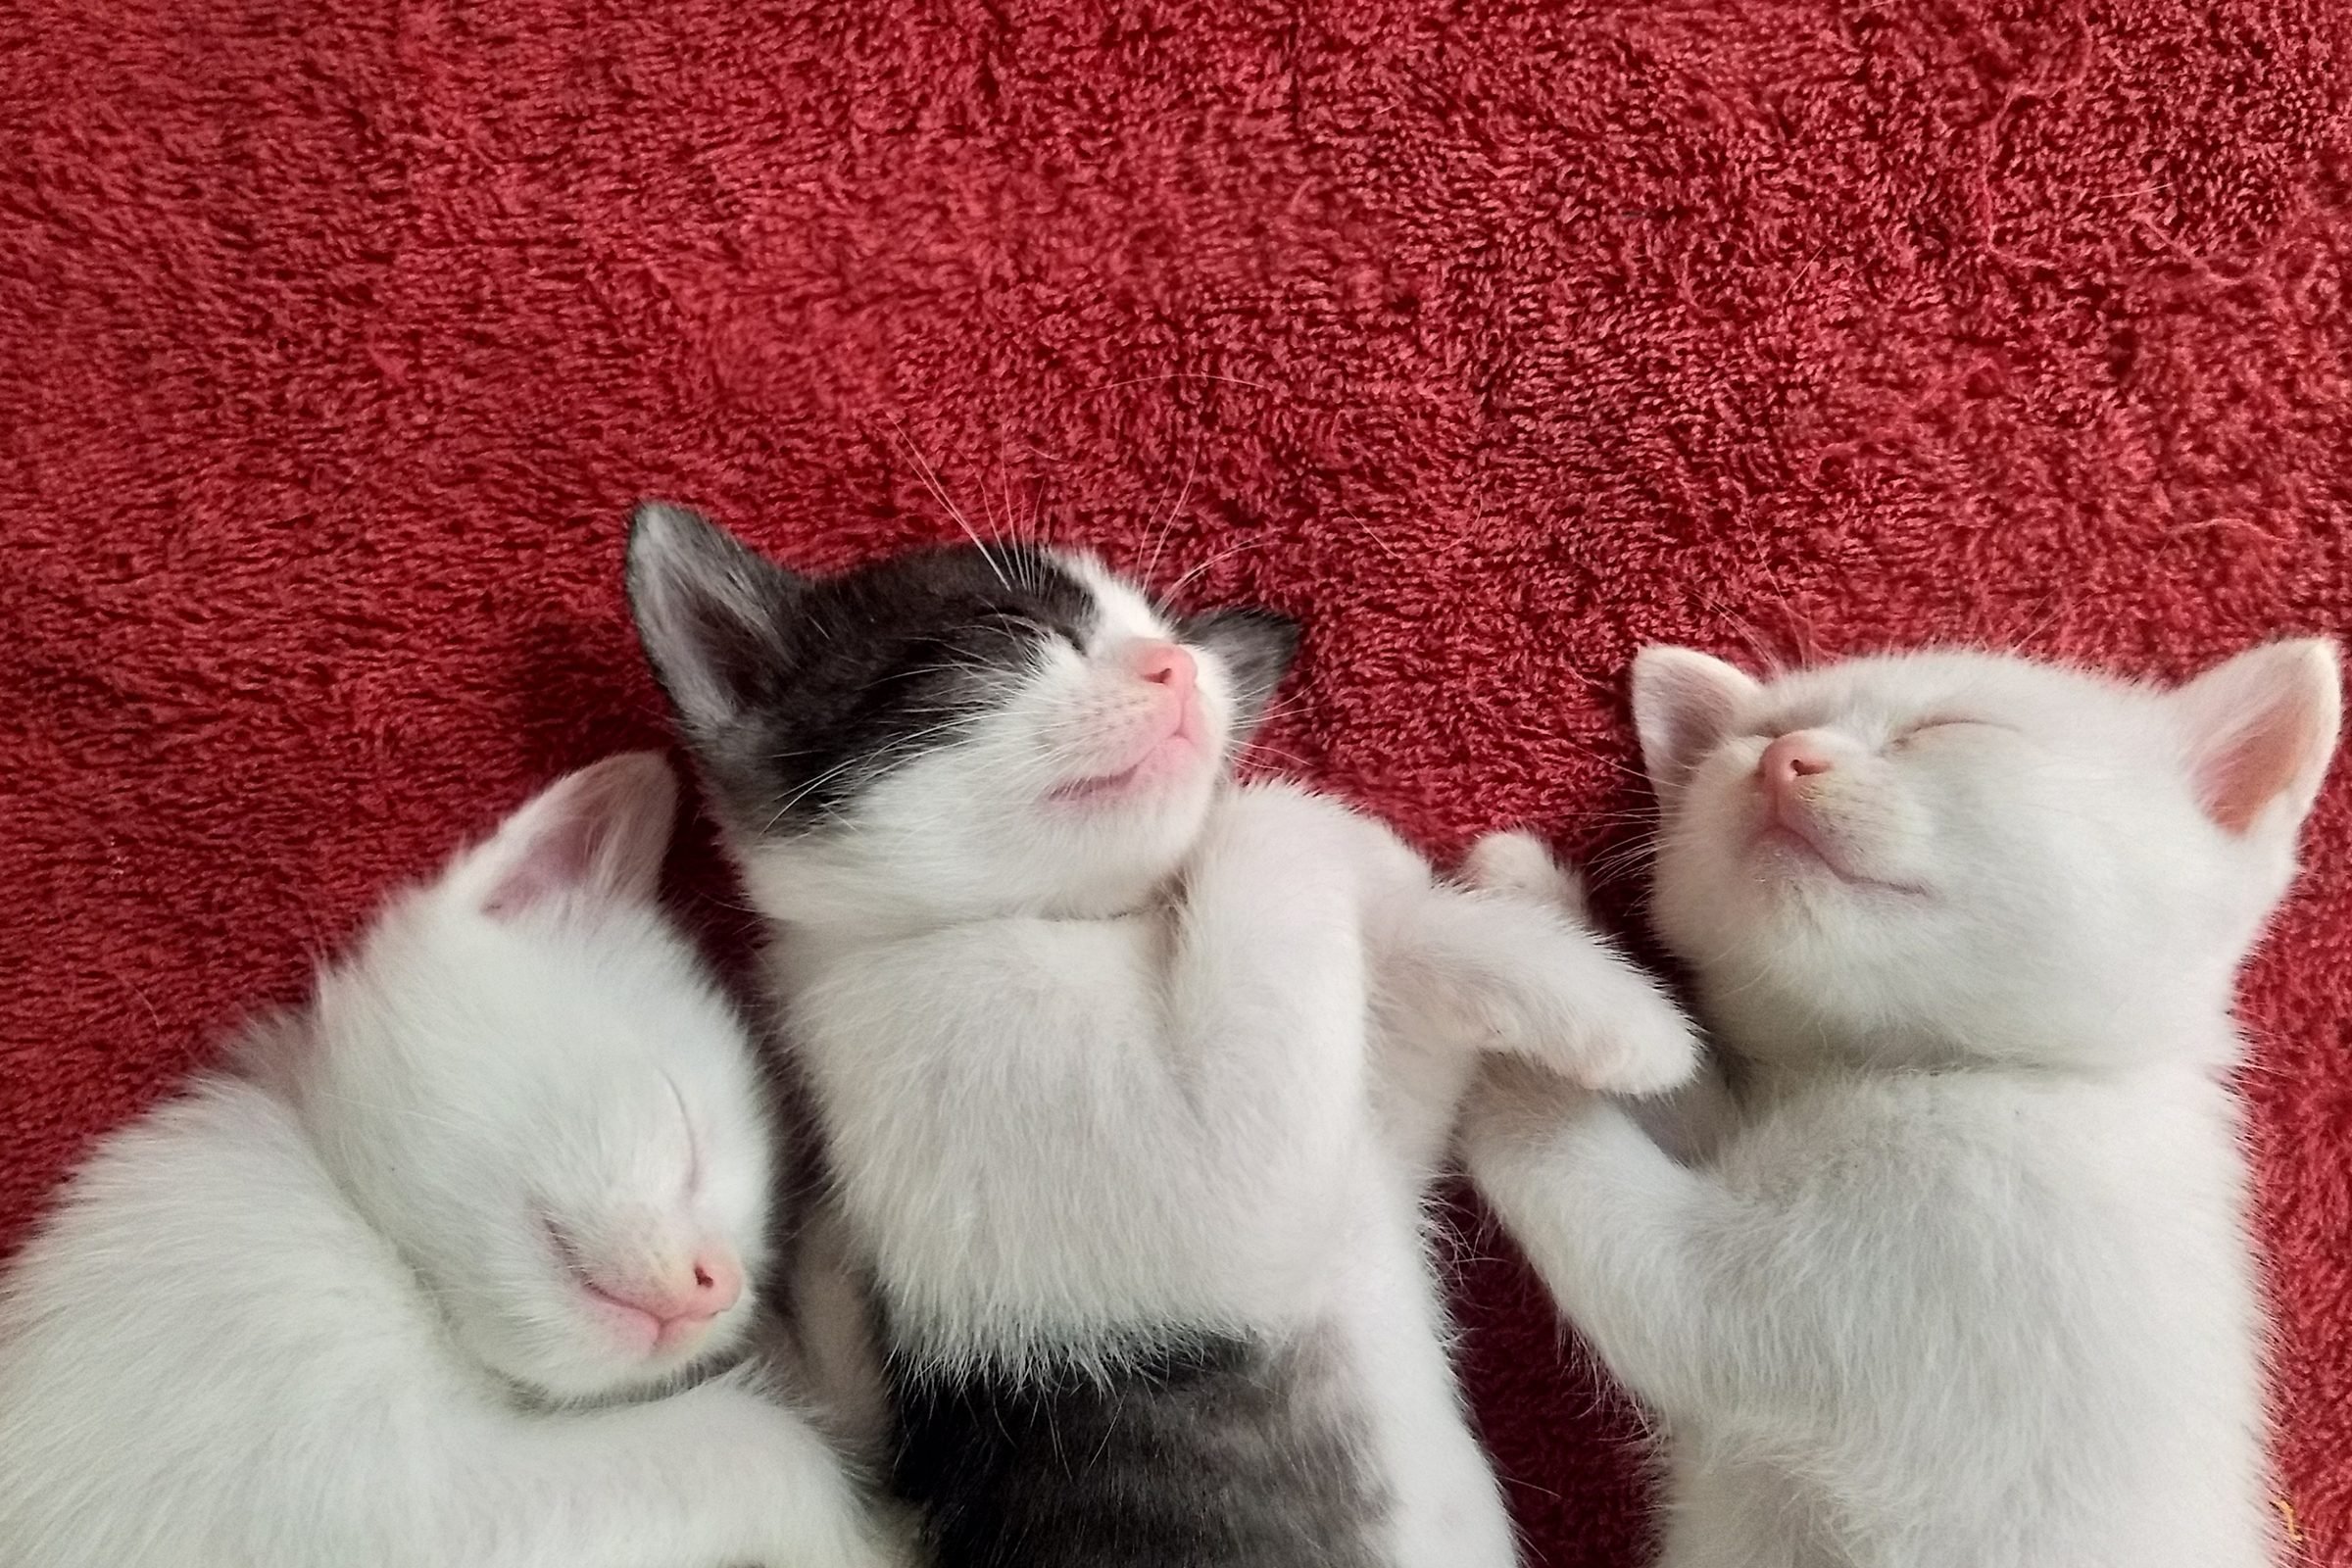 of the Cutest Photo of Kittens Sleeping. Reader's Digest